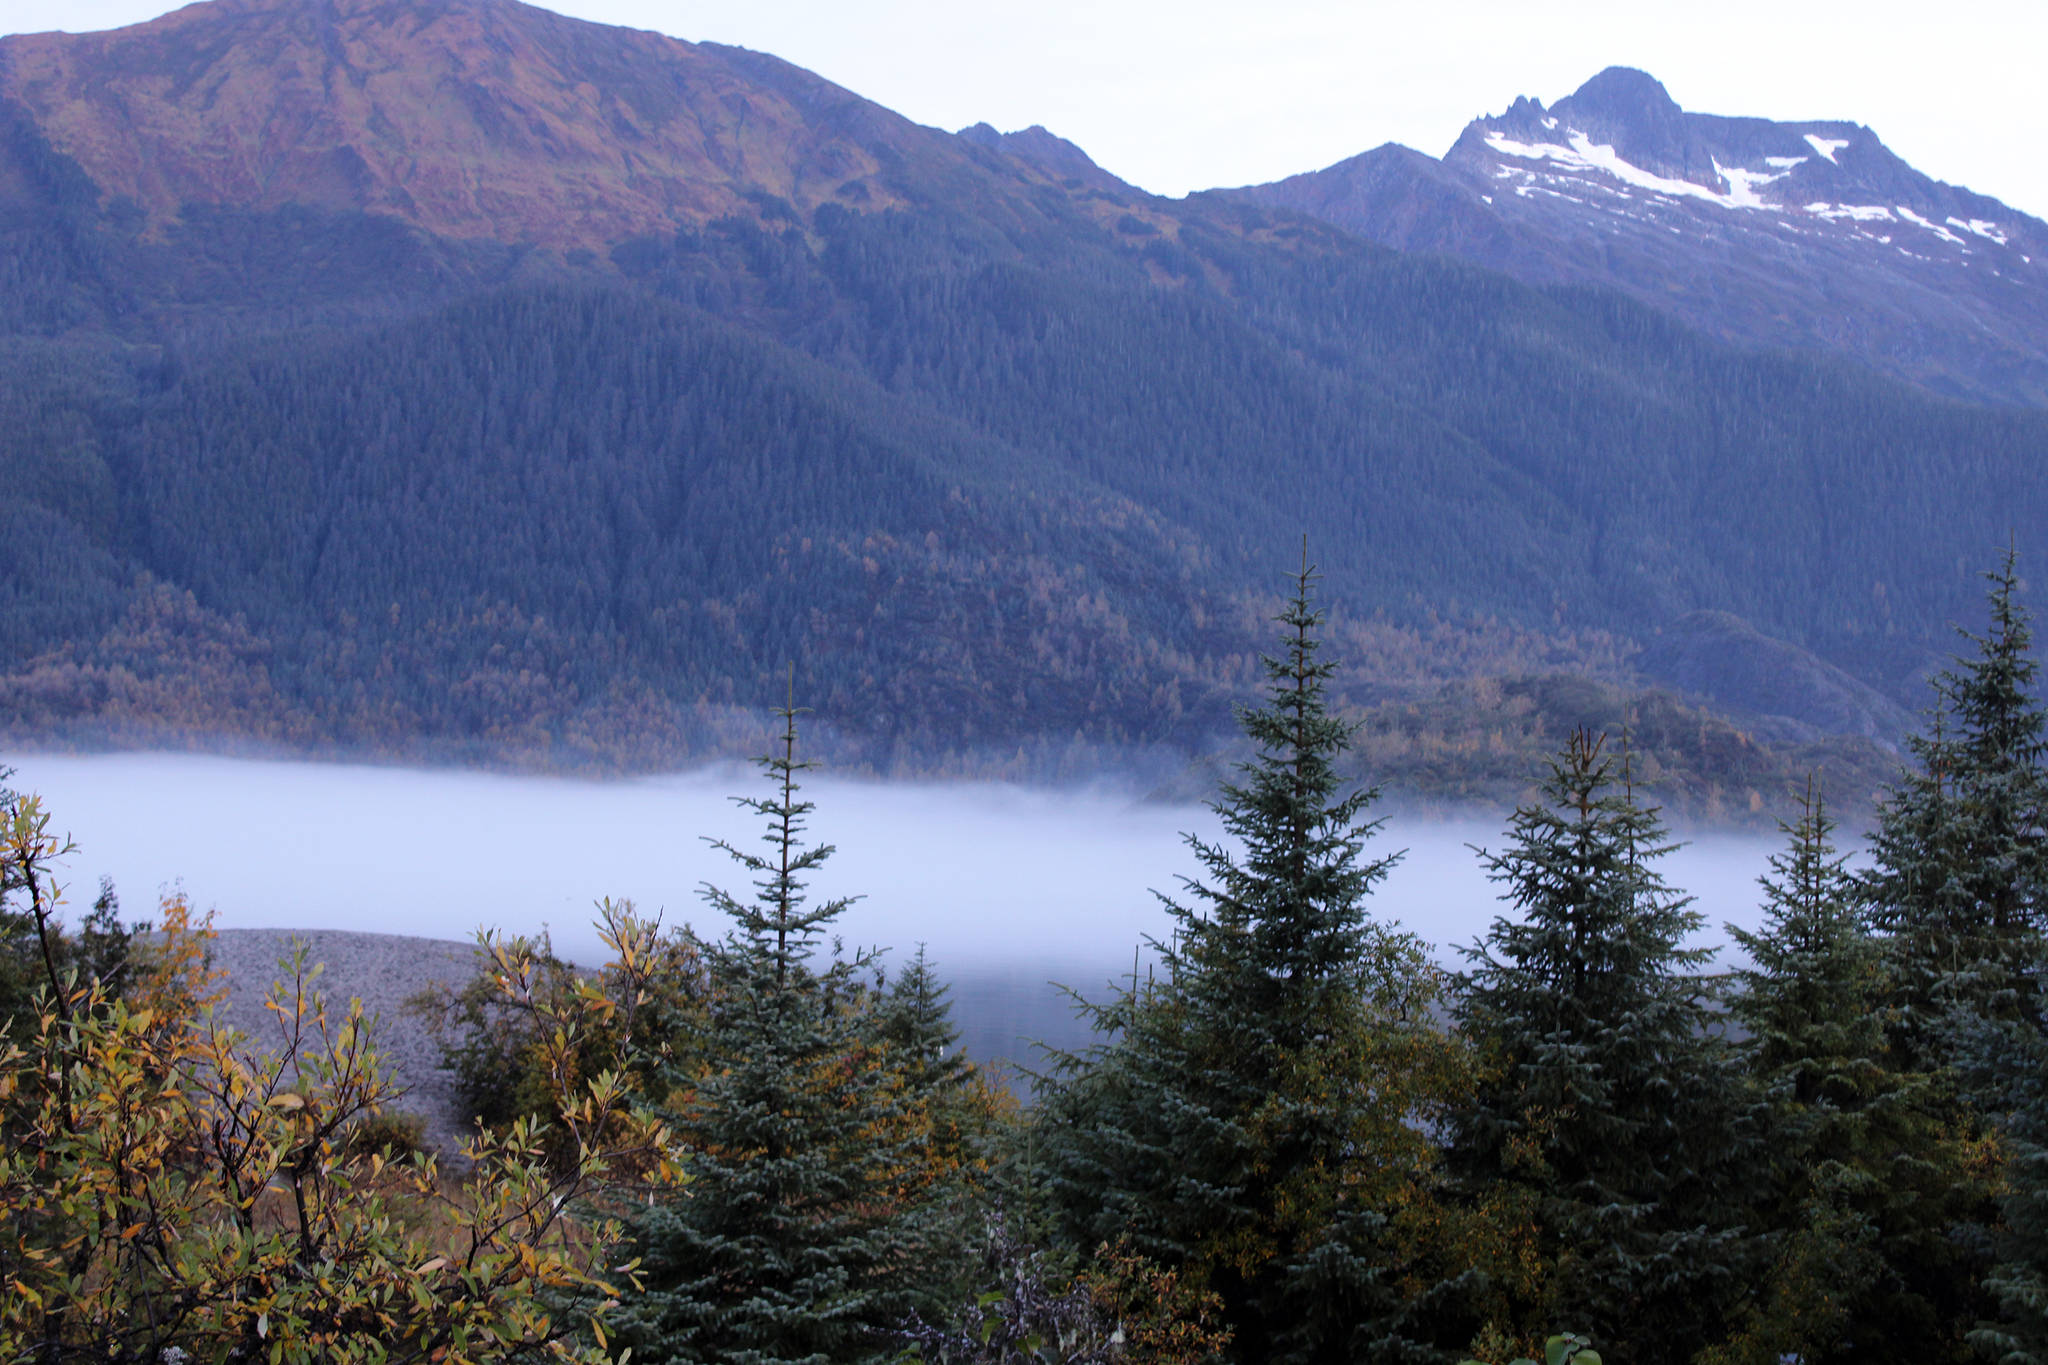 Mist hangs in the air in the Tongass National Forest in September 2020. For the last 20 years, the controversial Roadless Rule has been in effect, prohibiting roads on protected federal lands. Late last year, The Trump administration lifted the Roadless Rule. (Ben Hohenstatt / Juneau Empire File)